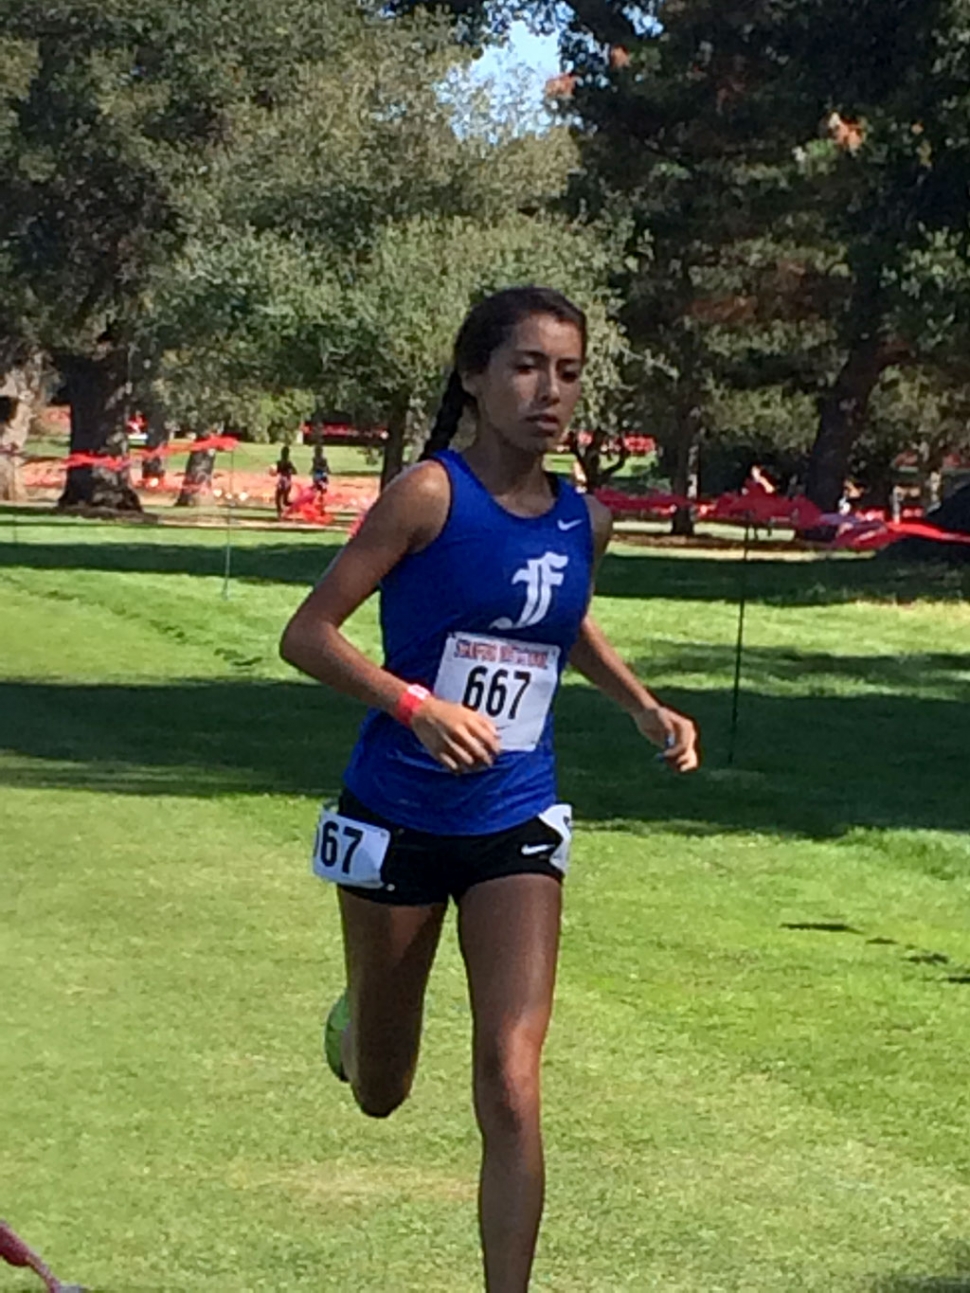 Lupita Perez is a Varsity runner for the Lady Flashes. She is currently a second year varsity cross country runner, this past weekend the team competed at the Stanford Invitational. Lupita along with her teammates Jackie Chavez, Alexis Tafoya, Briana Segoviano and  Erika Ruiz have been the team scorers for the past four meets.